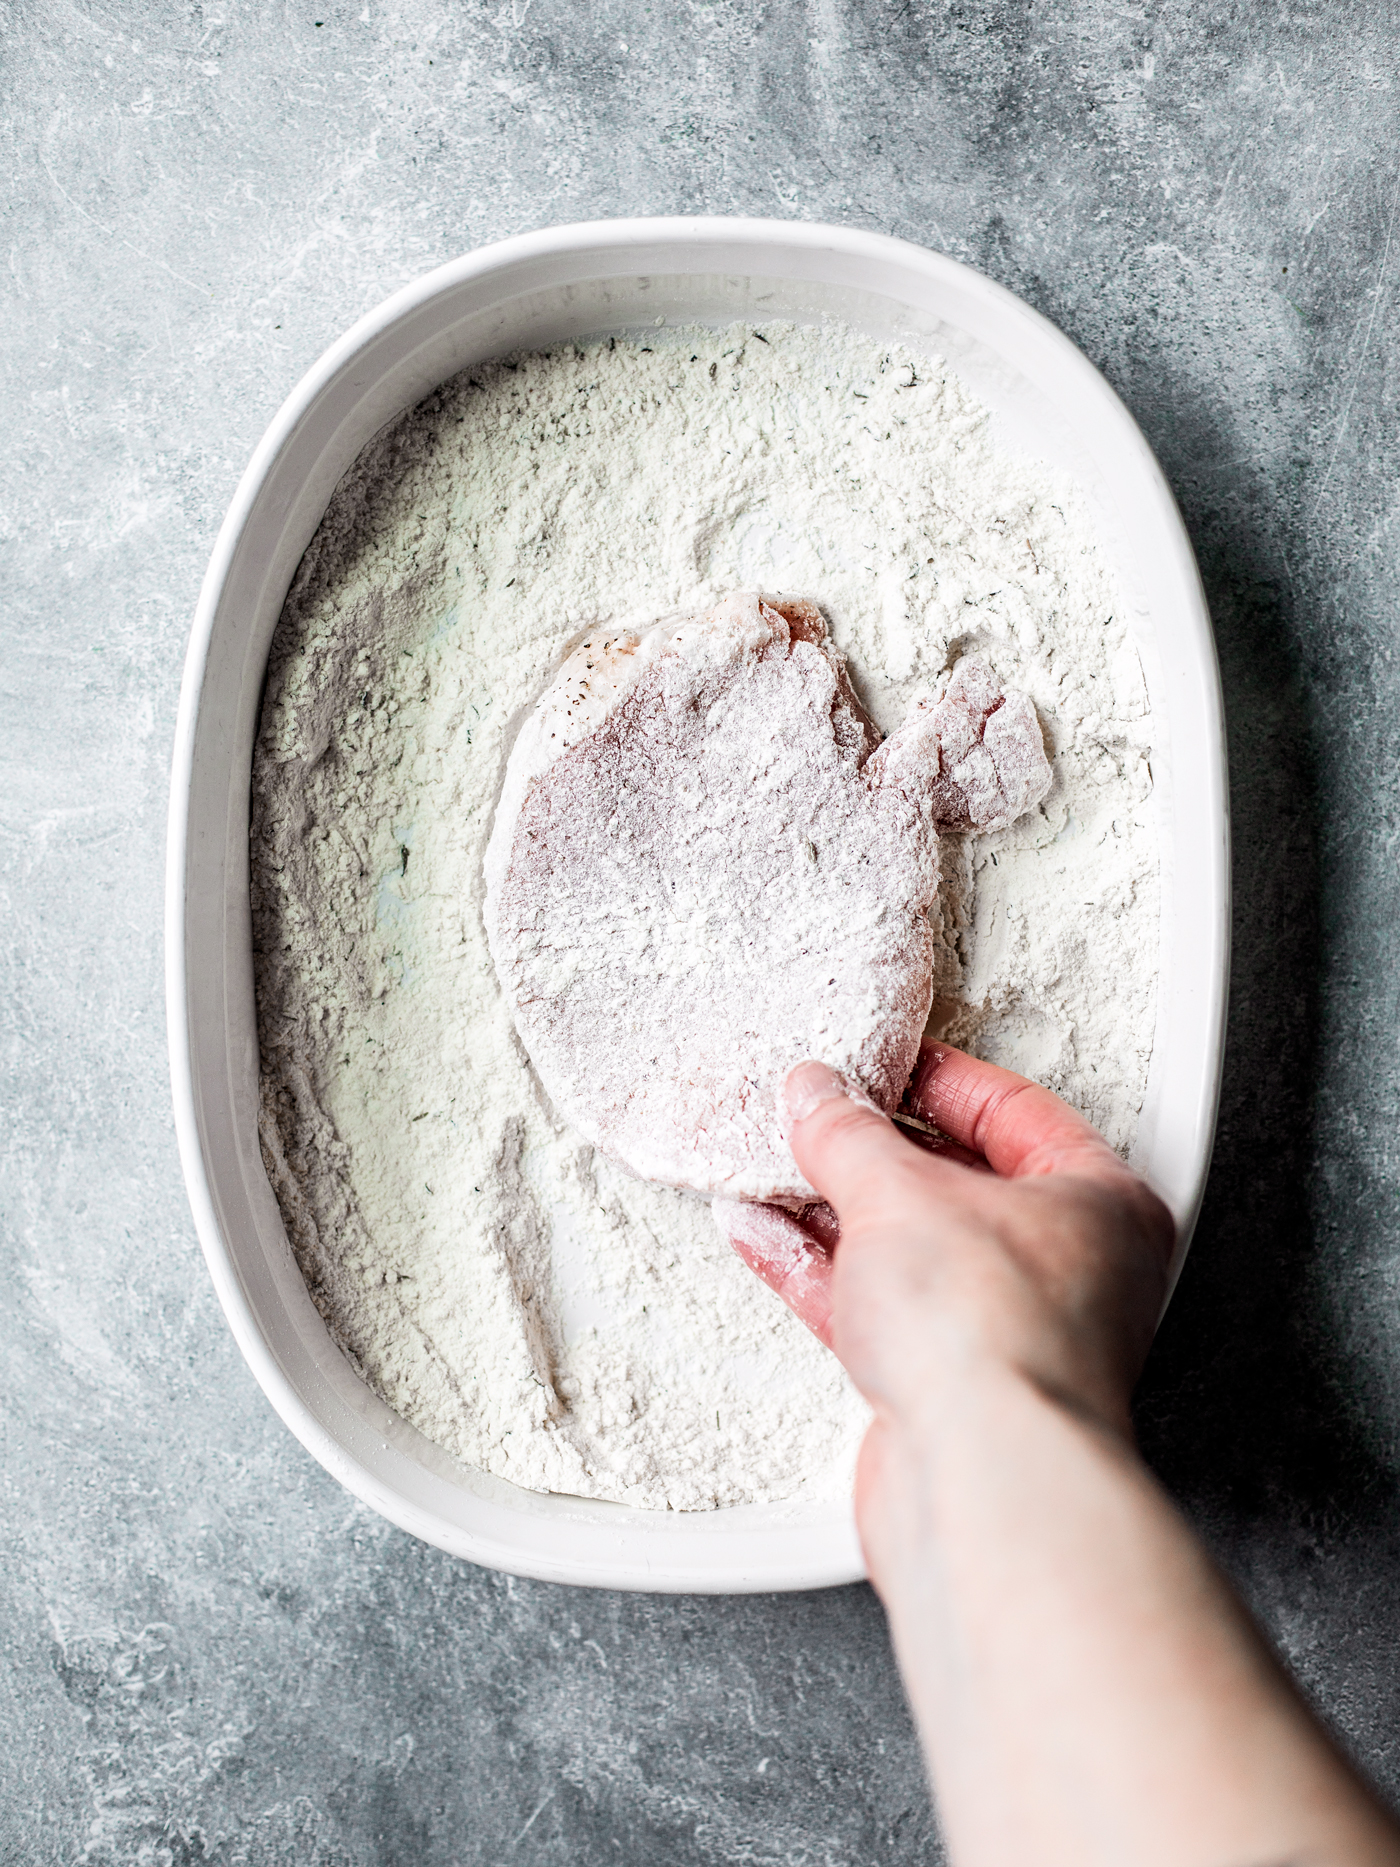 Hand taking floured pork chop out of dish of flour.